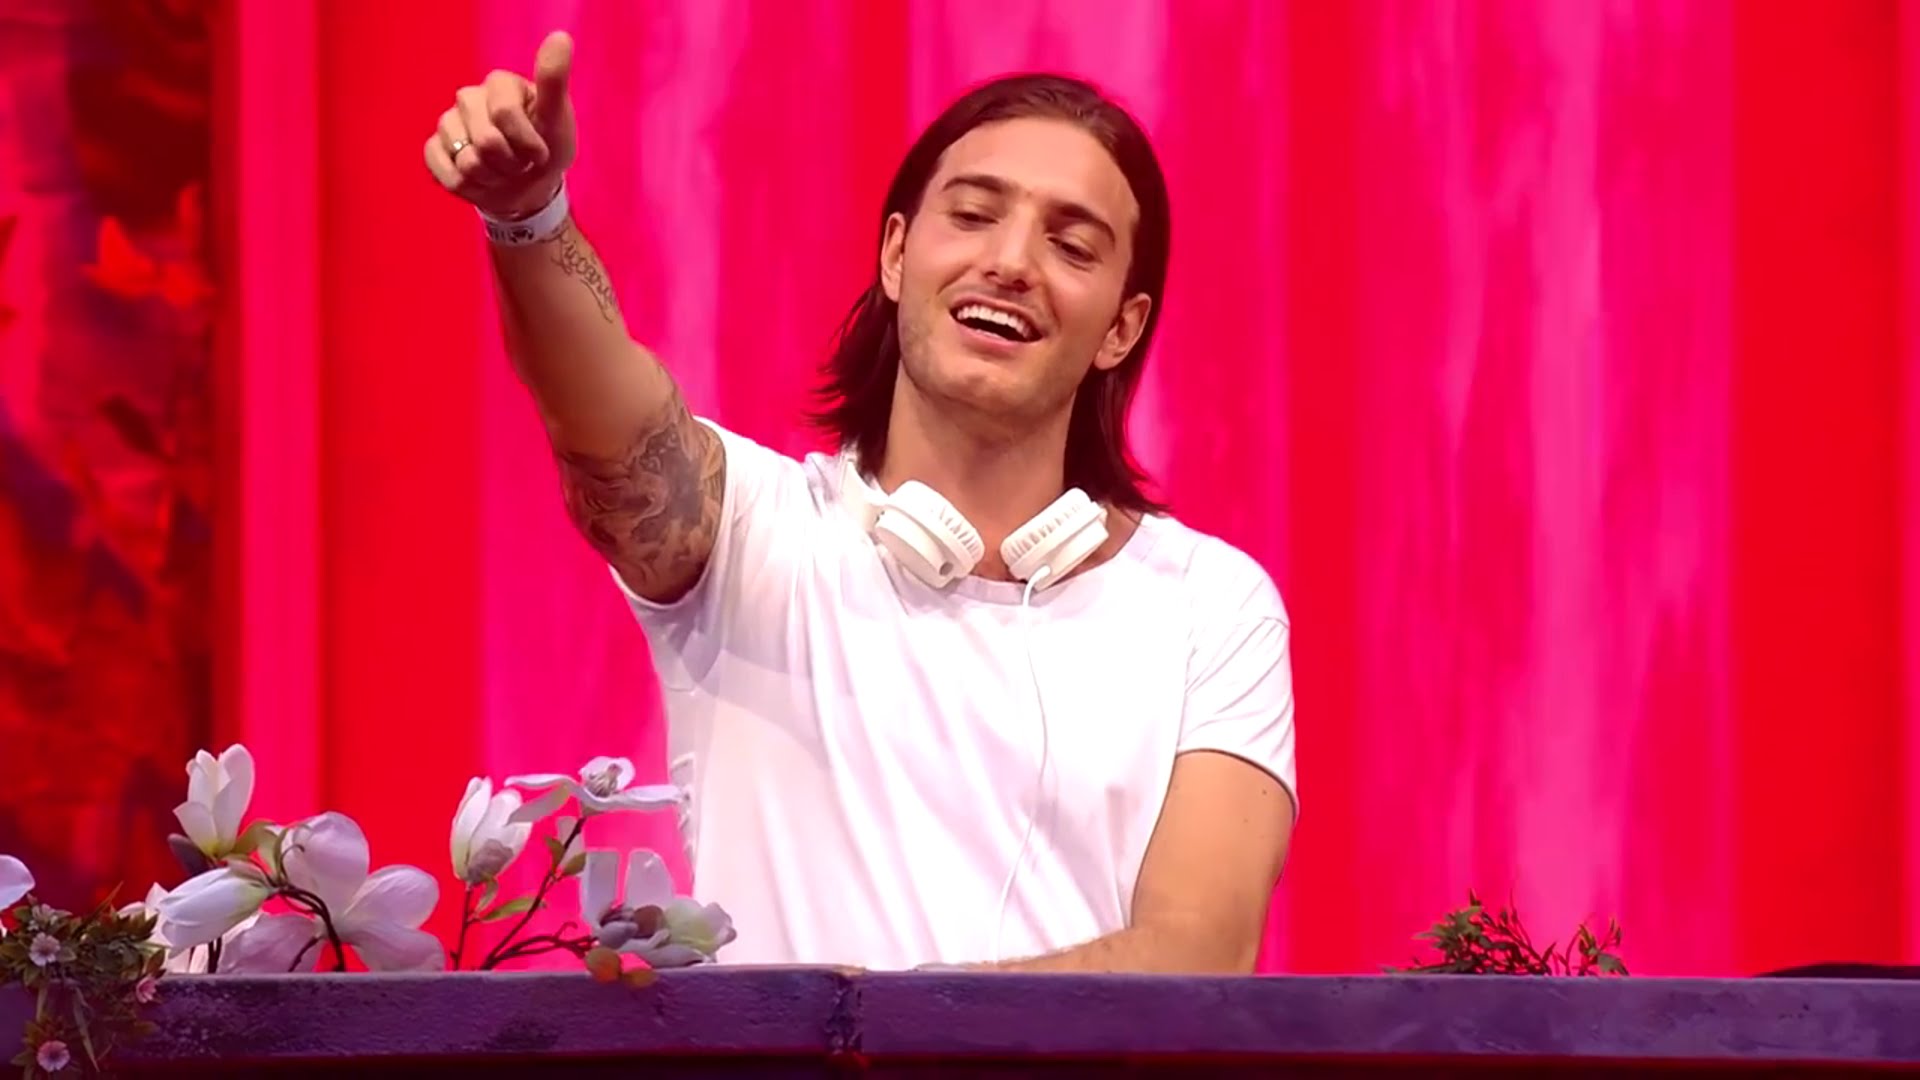 Alesso closing down the Tomorrowland Mainstage [LIVE]